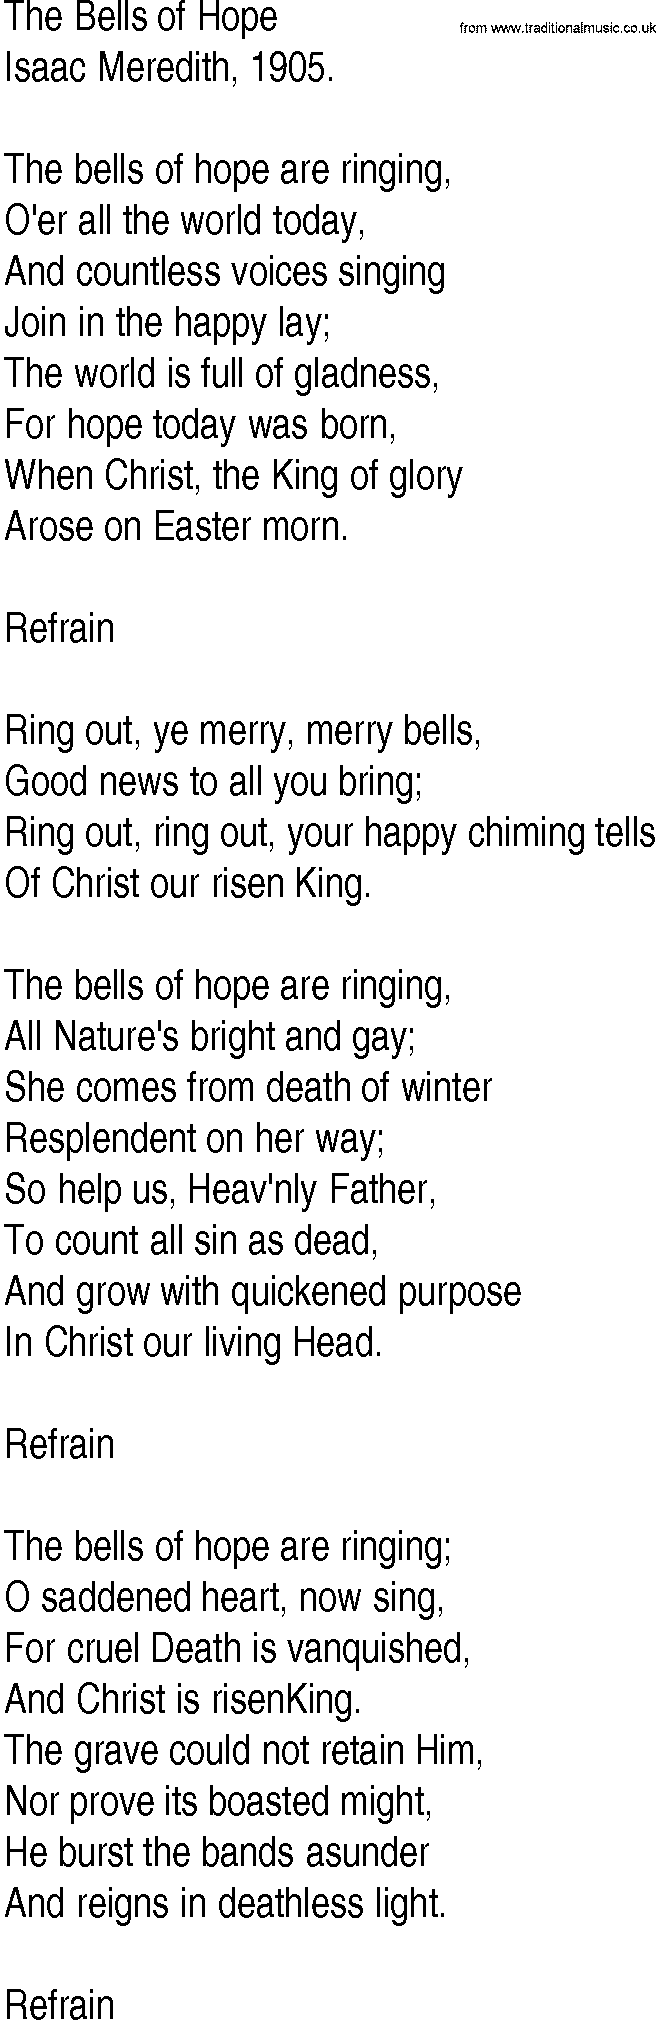 Hymn and Gospel Song: The Bells of Hope by Isaac Meredith lyrics